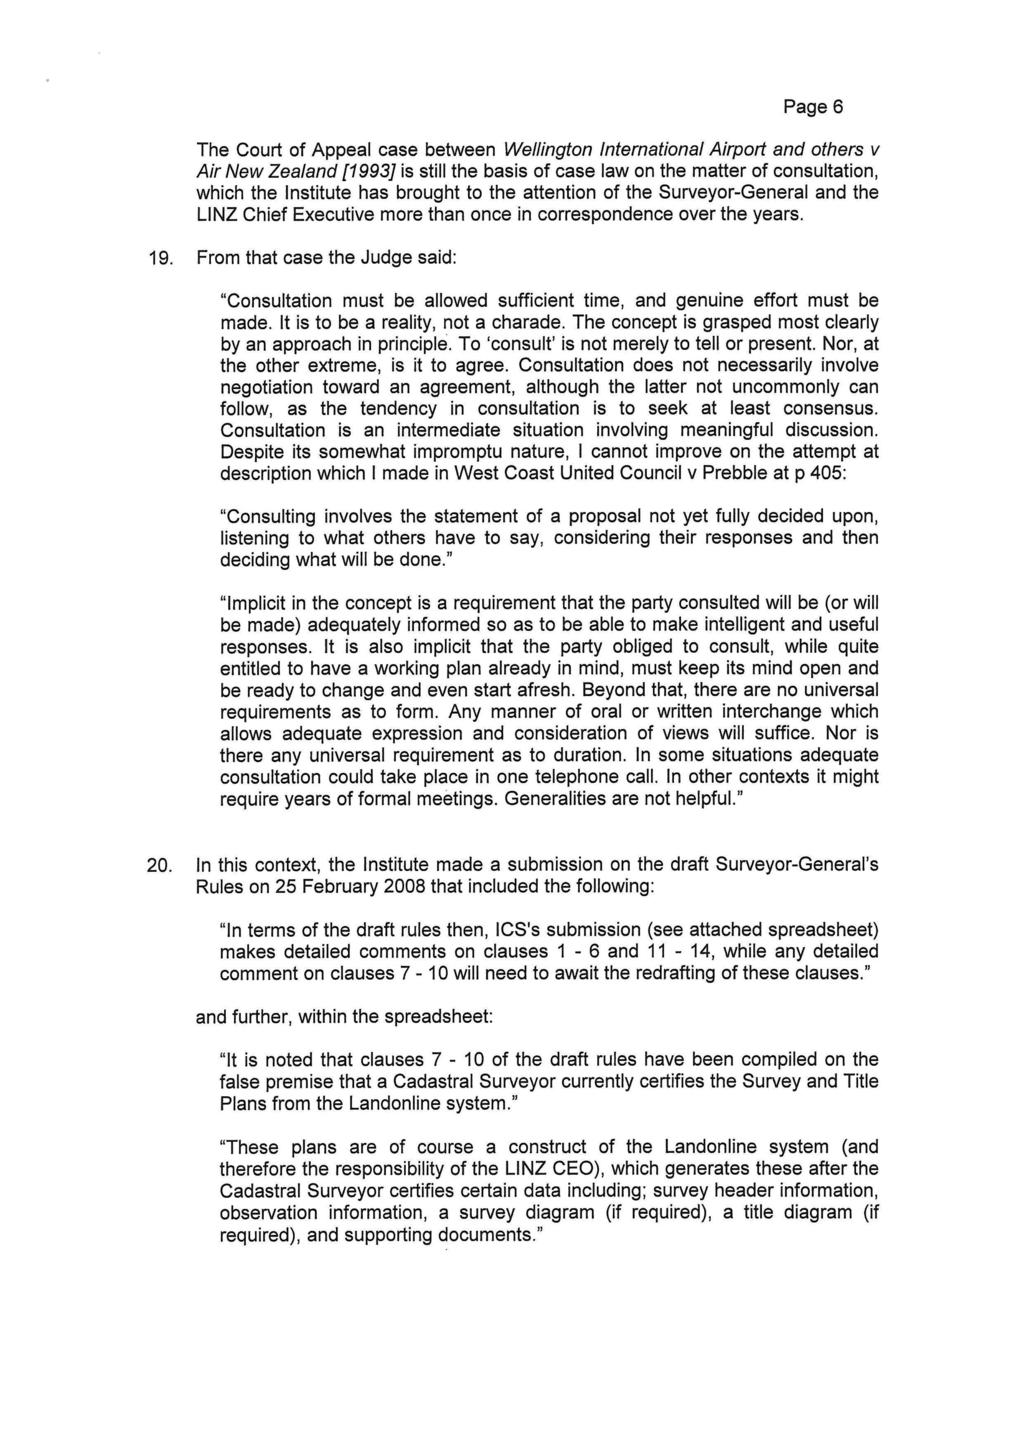 Page 6 The Court of Appeal case between Wellington Intemational Airport and others v Air New Zealand [1993] is still the basis of case law on the matter of consultation, which the Institute has